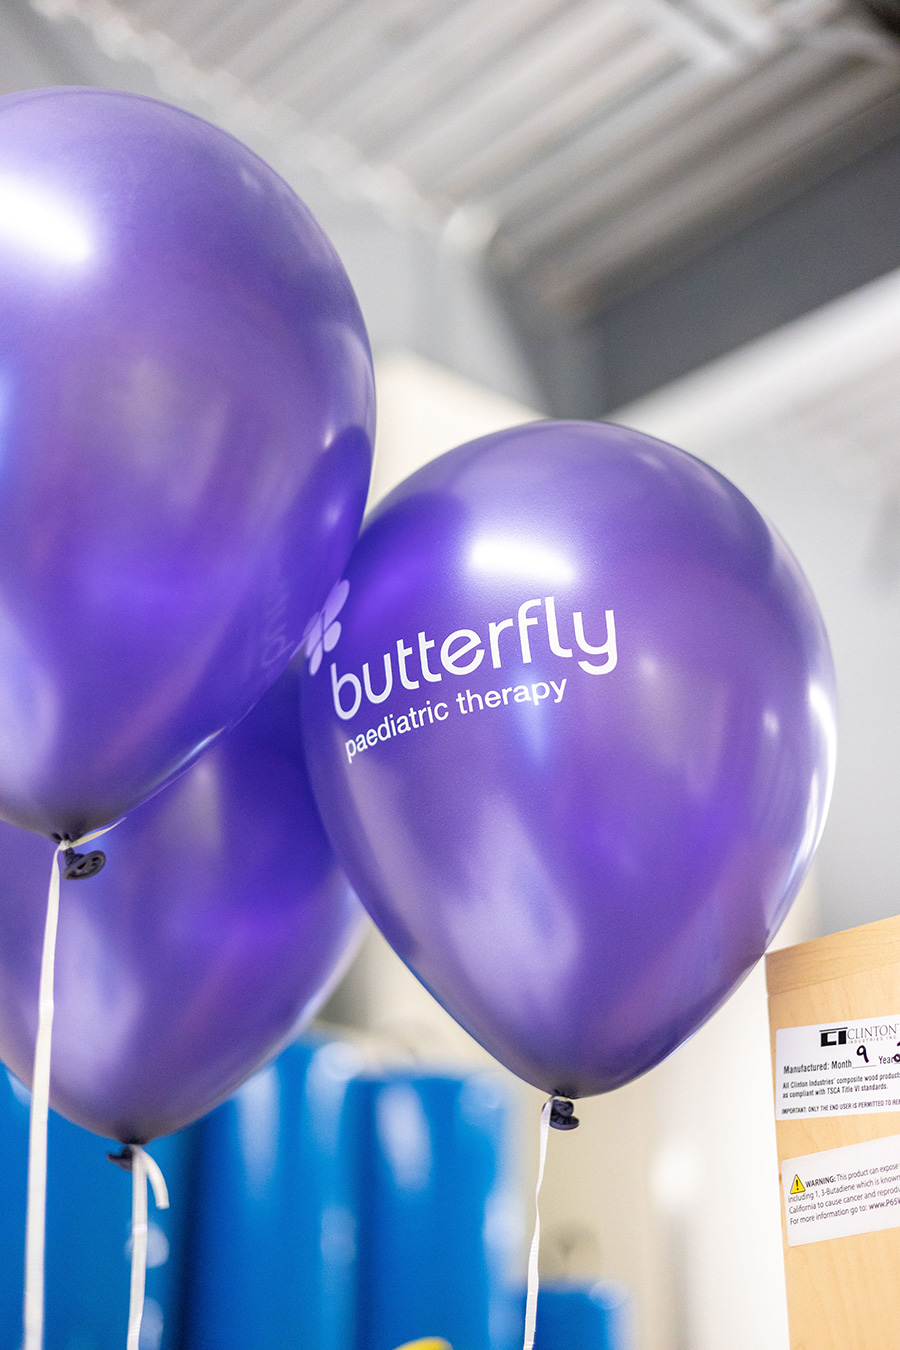 Butterfly Paediatric Therapy: FAQ